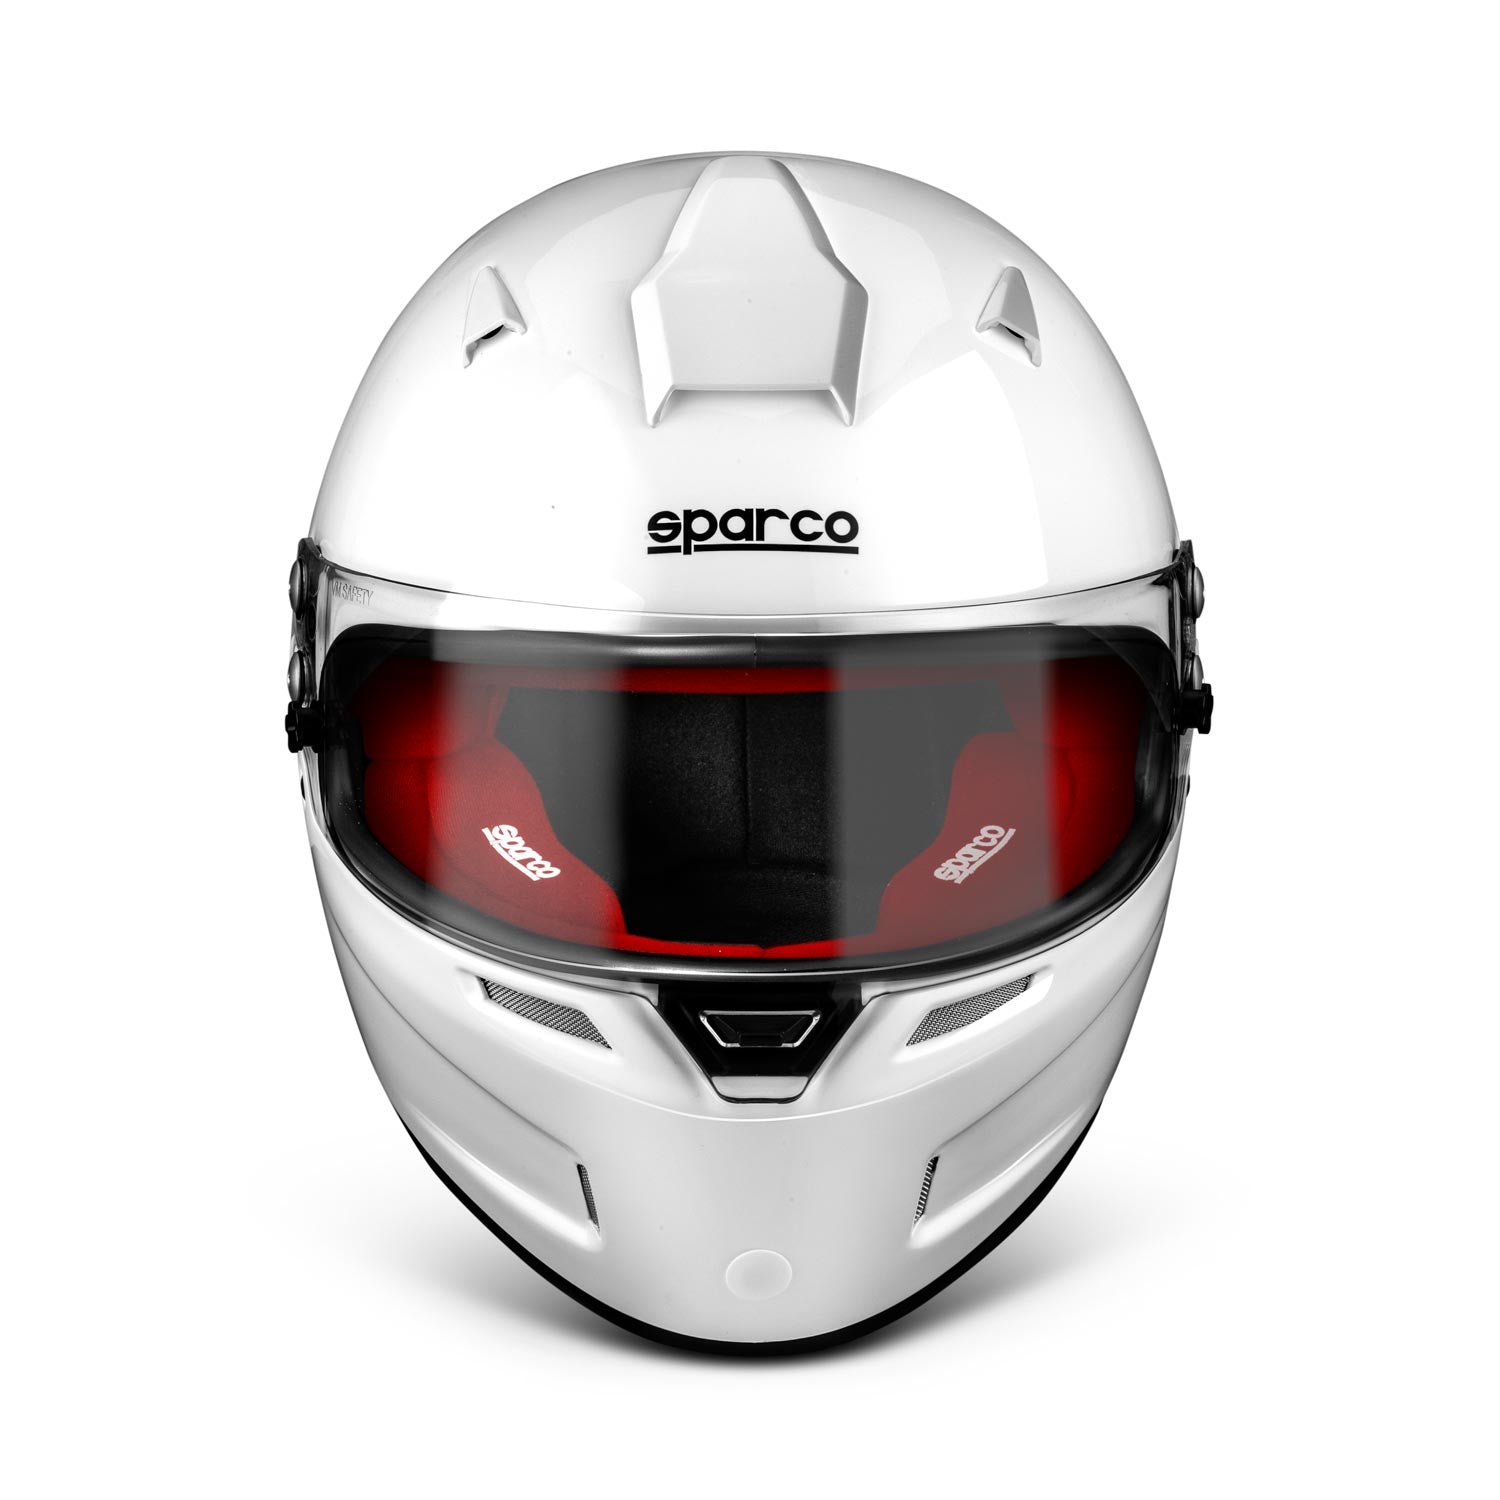 SPARCO 003375BIRS2M RF-5W Racing helmet, FIA/SNELL SA2020, white/red, size M (57-58) Photo-0 